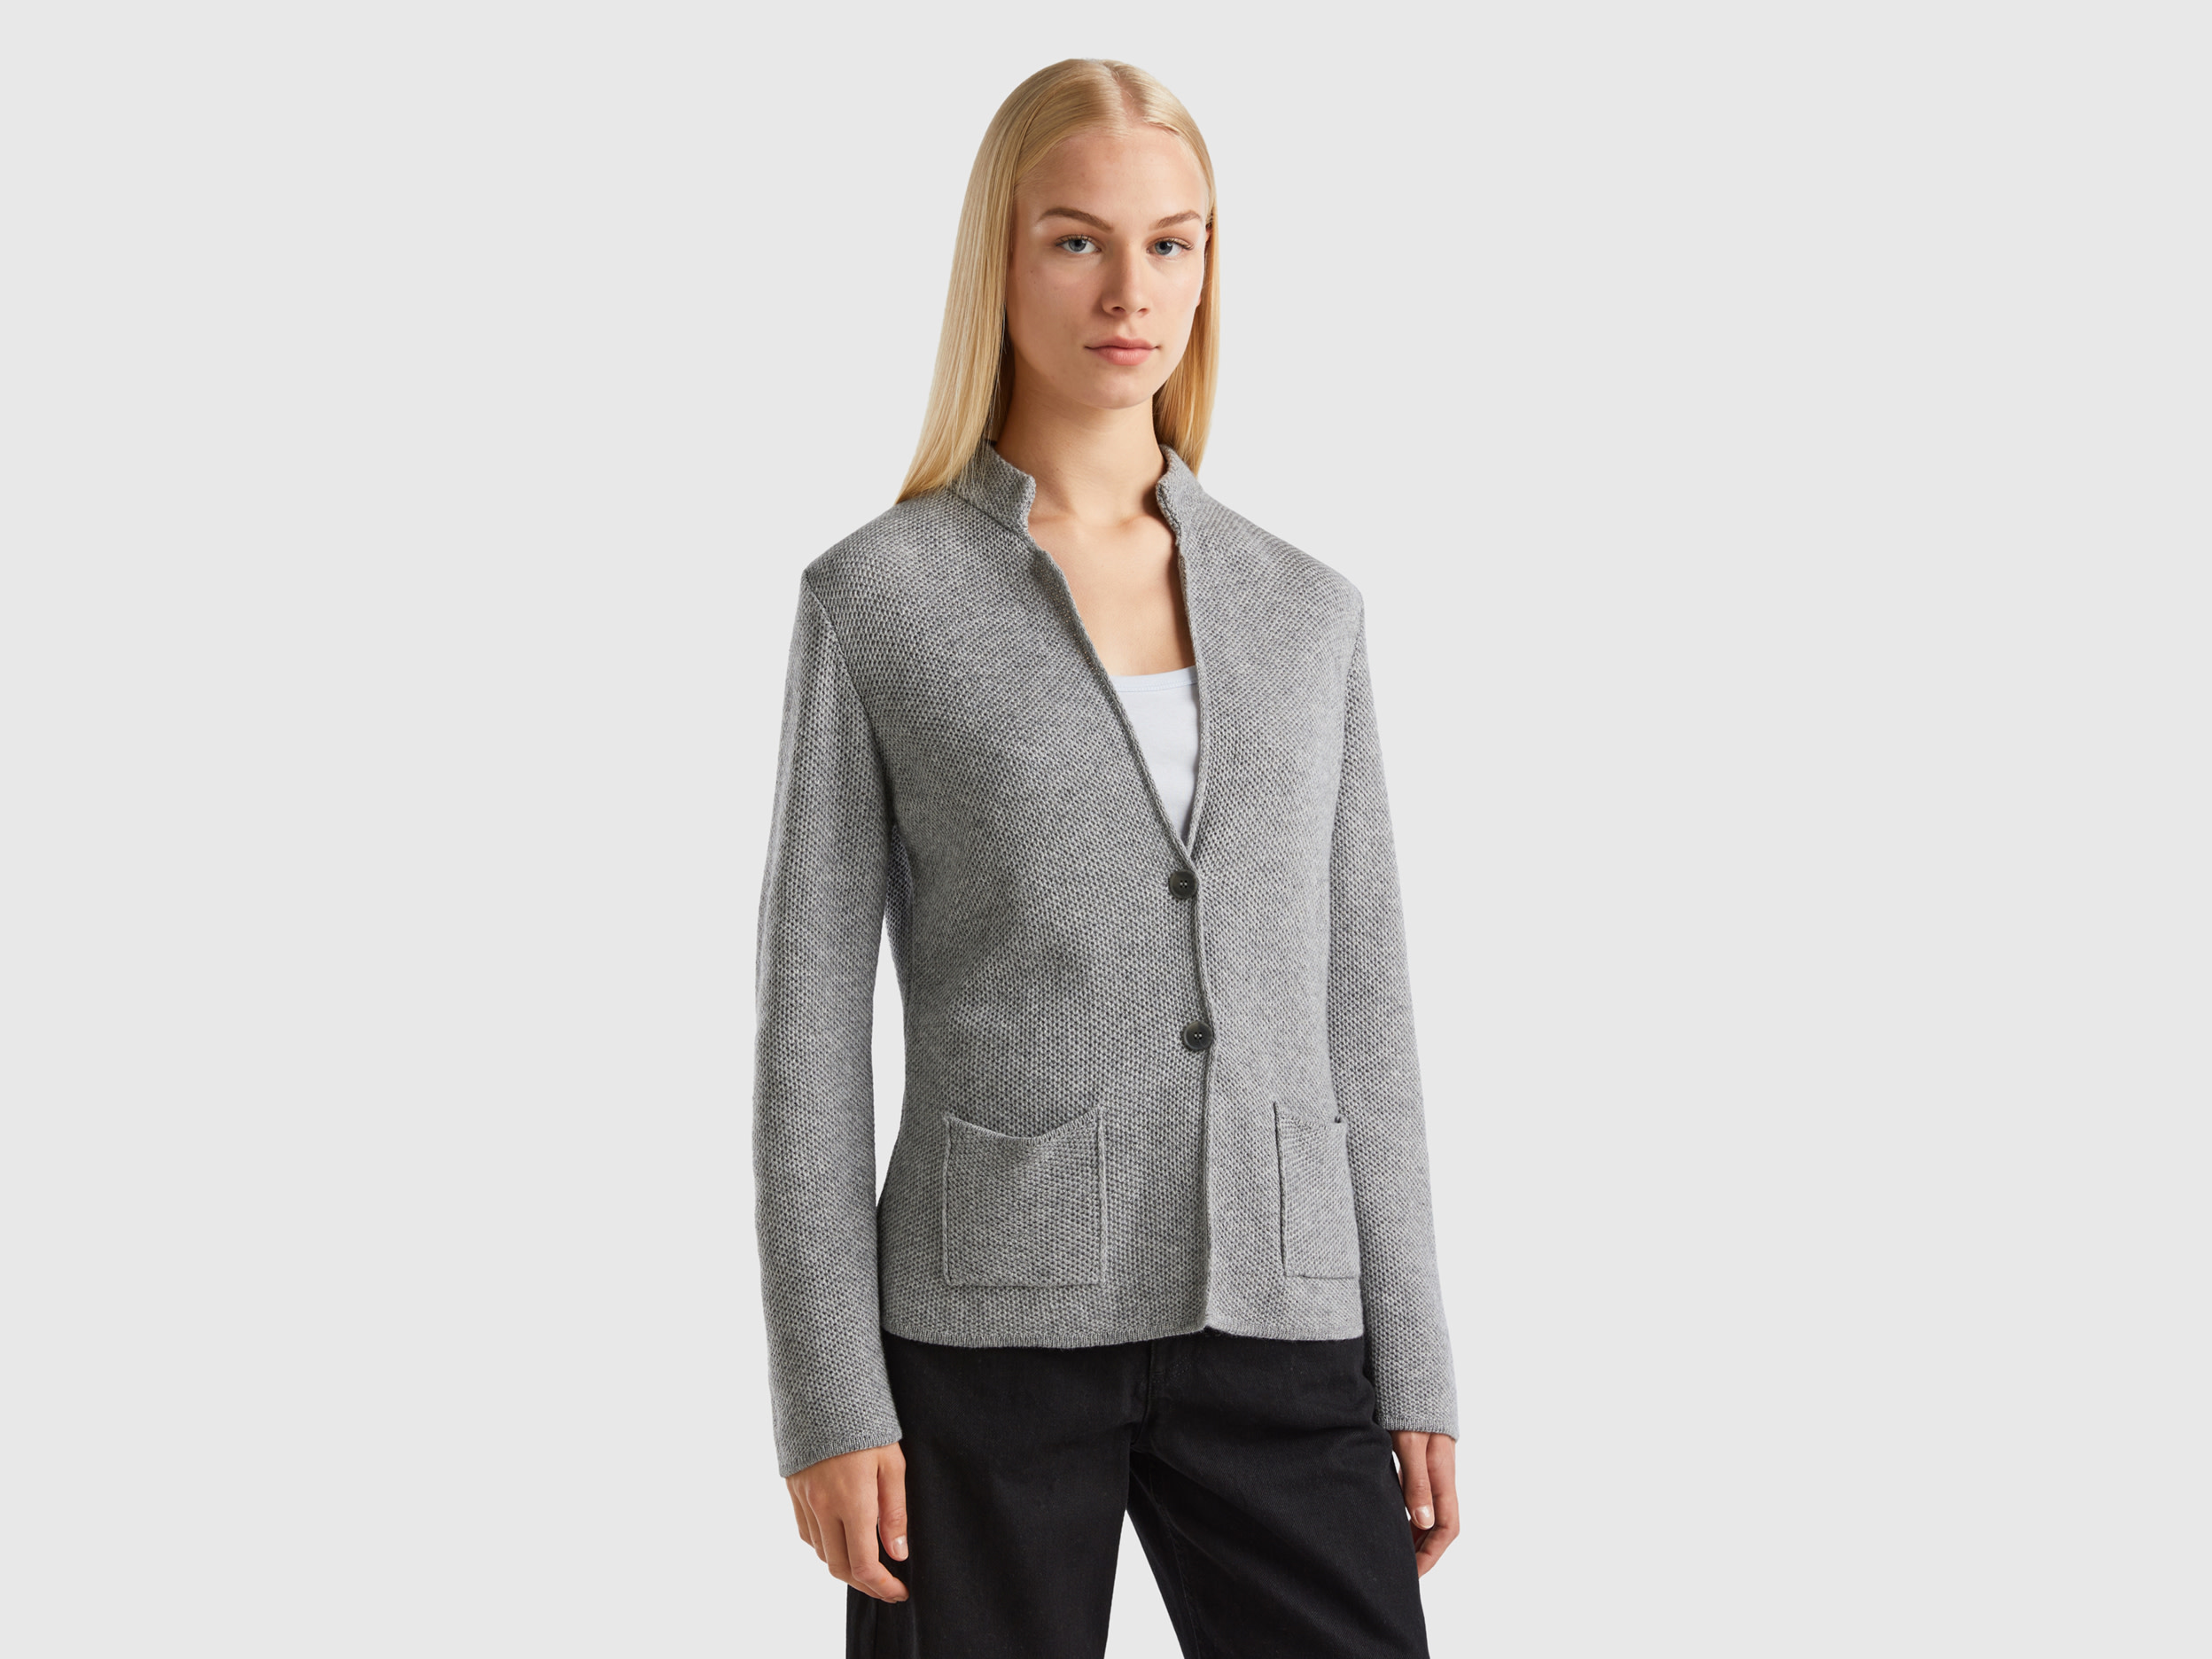 Benetton, Knit Jacket In Wool And Cashmere Blend, size XS, Gray, Women